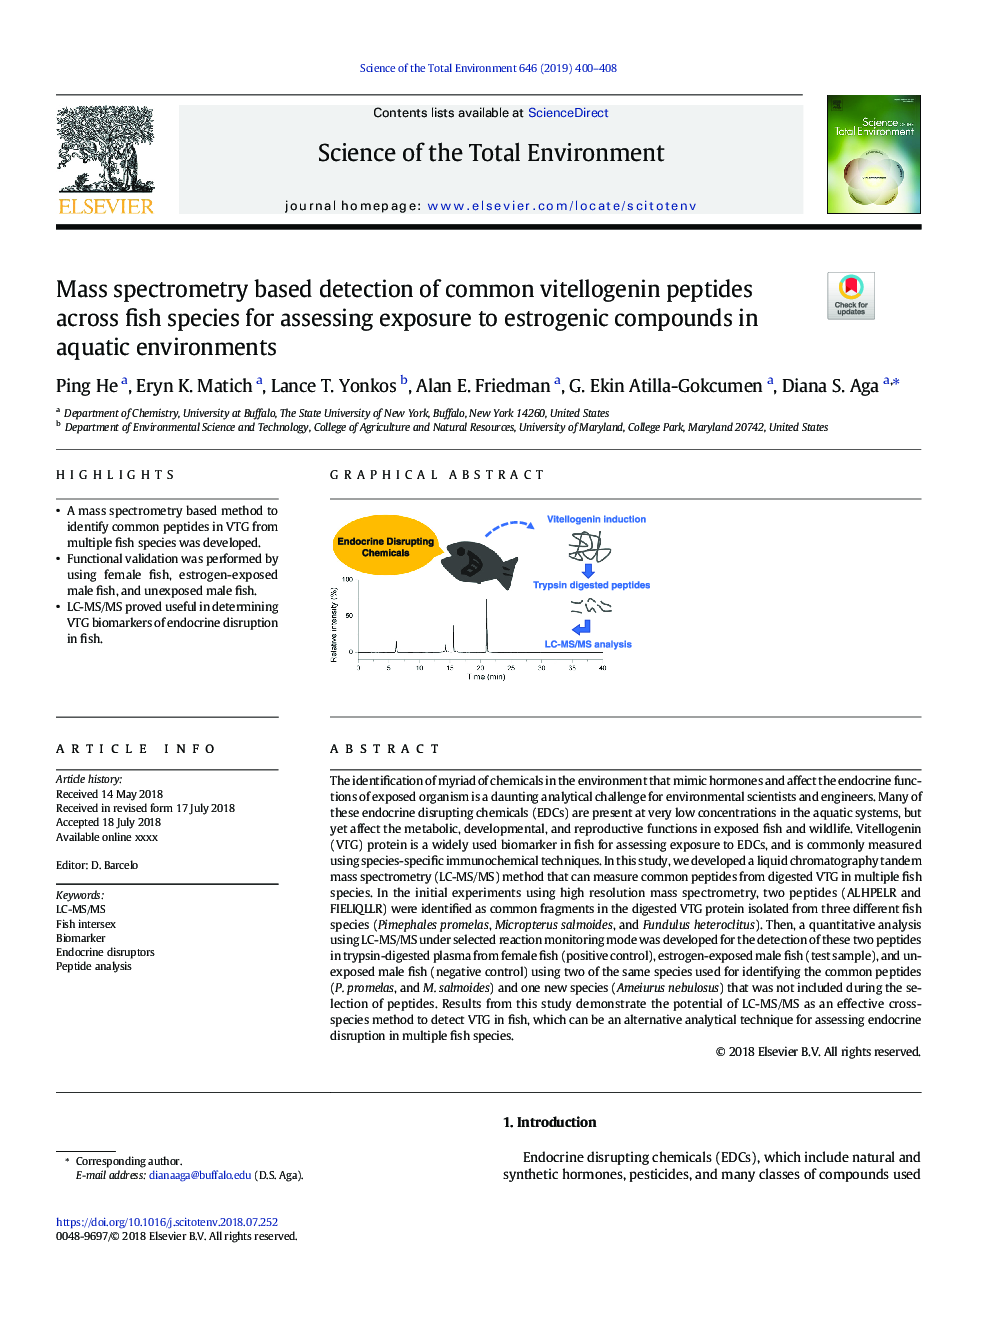 Mass spectrometry based detection of common vitellogenin peptides across fish species for assessing exposure to estrogenic compounds in aquatic environments